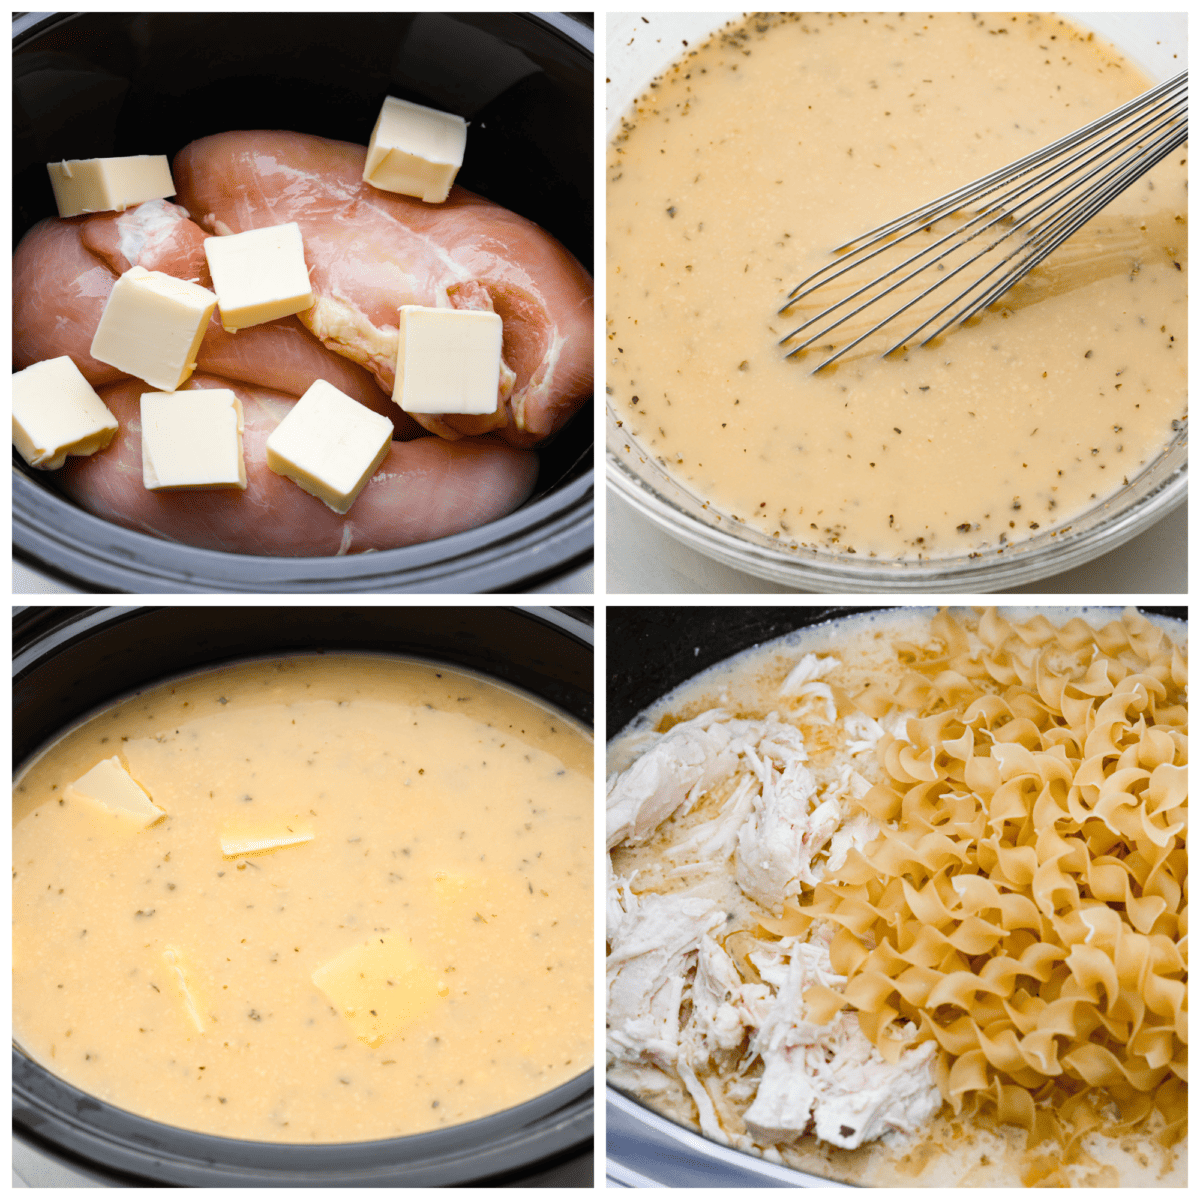 4-photo collage of the chicken breasts being added to a crockpot along with the sauce ingredients and pasta.